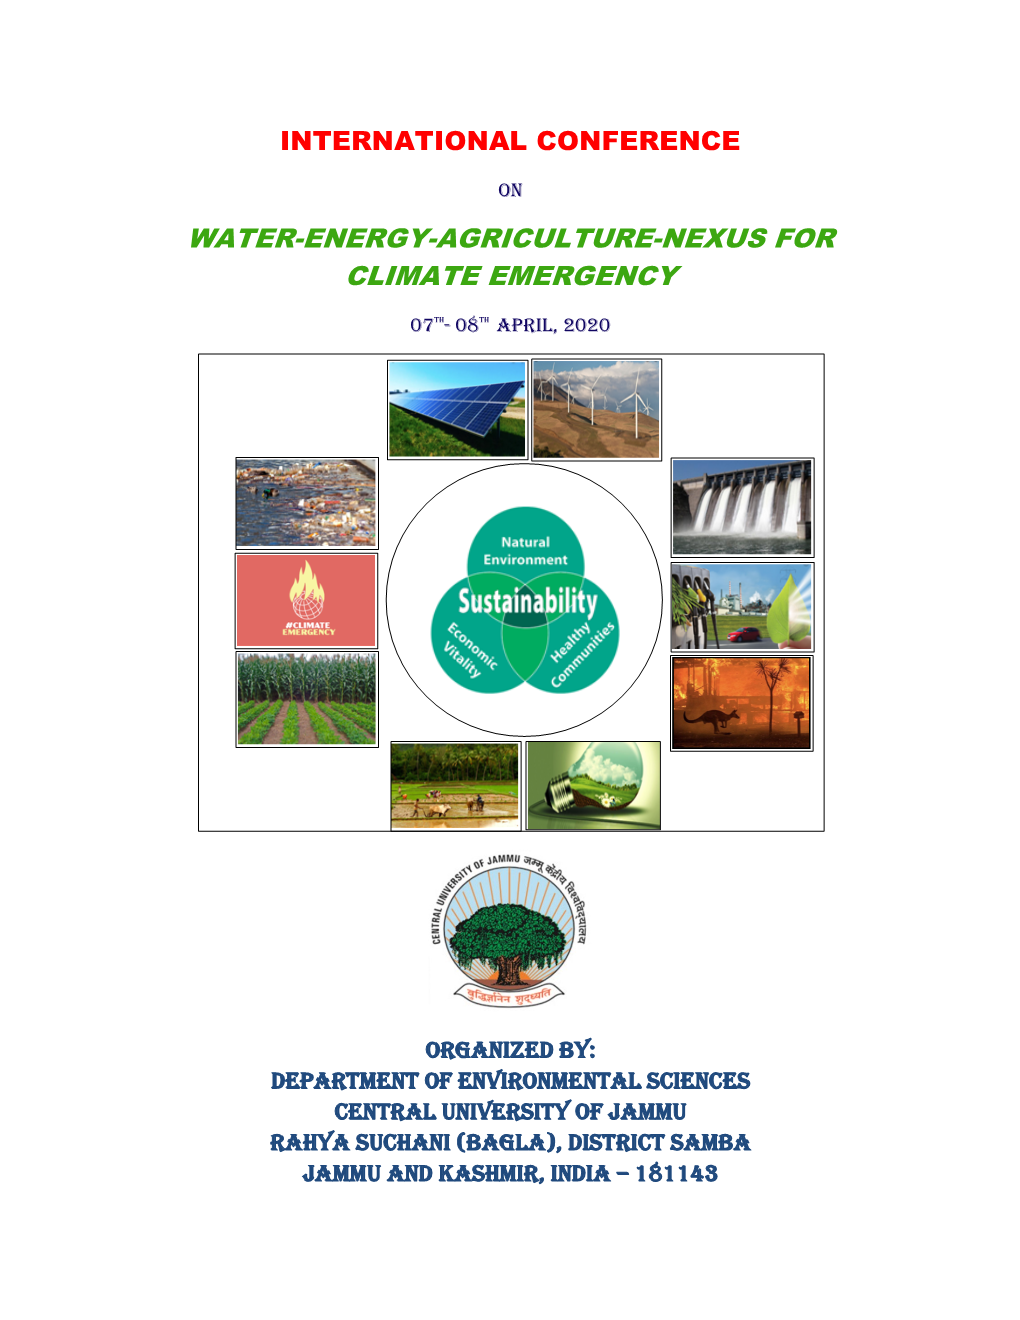 Water-Energy-Agriculture-Nexus for Climate Emergency